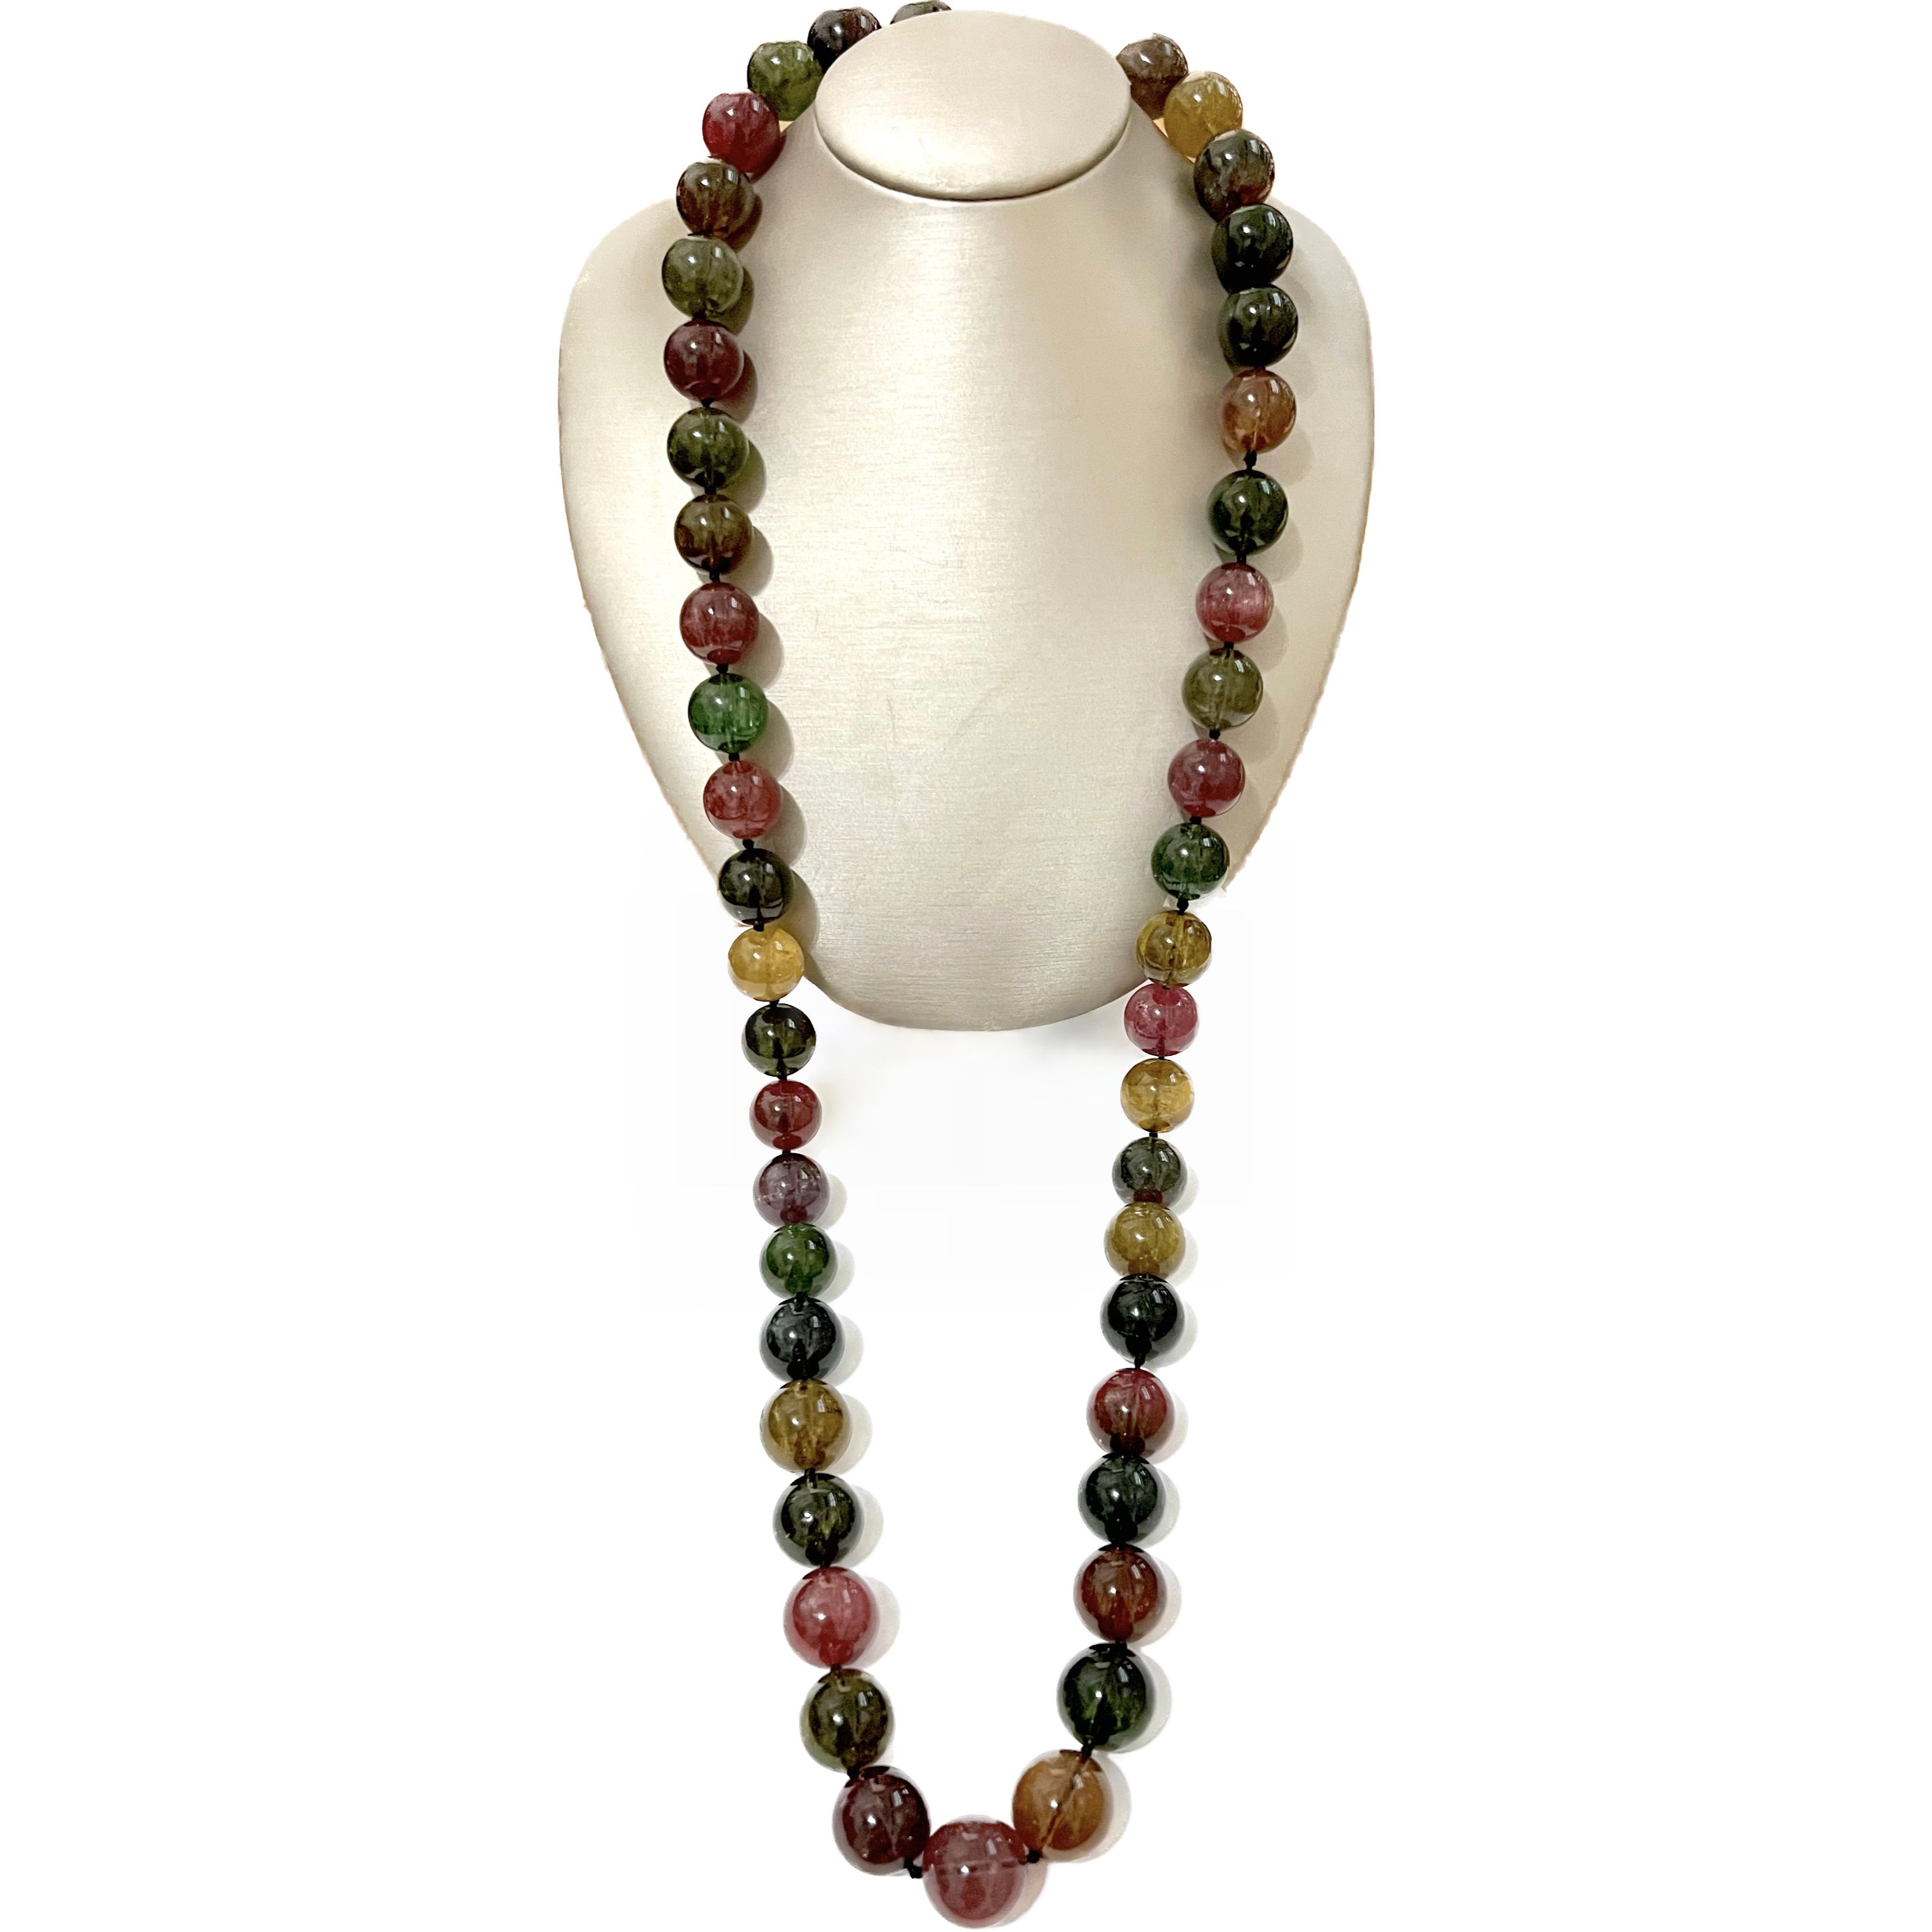 This amazing strand of multi-color tourmaline beads will amazing with any outfit.  The rich, vibrant colors of maroon red, green, purple, and yellow tourmaline beads will attract everyone's attention!  The beads range in size from 14mm - 16mm, the